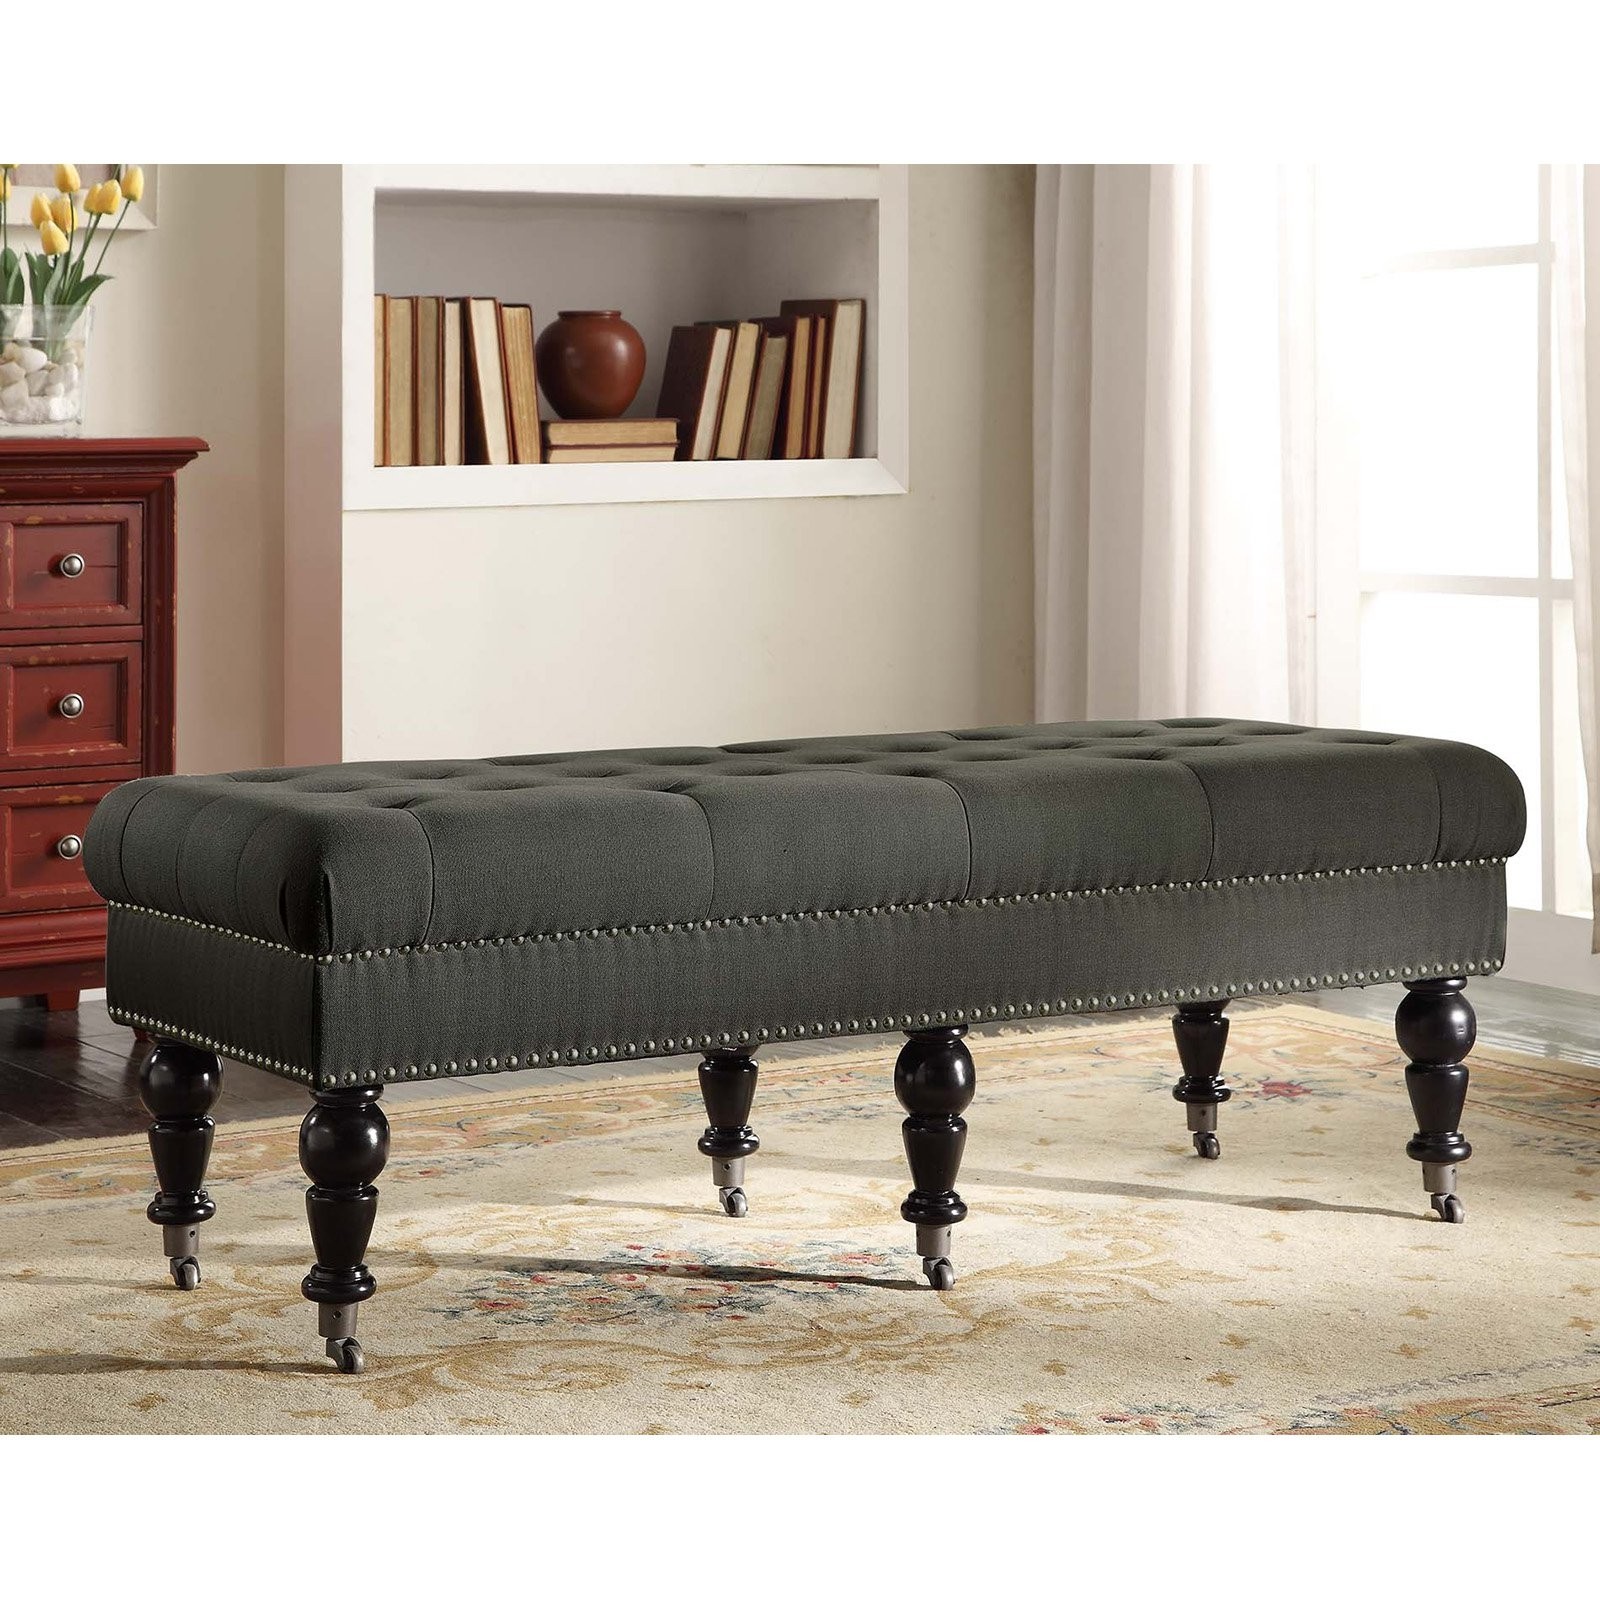 Linon isabelle upholstered bedroom bench reviews wayfair 166 99 perfect